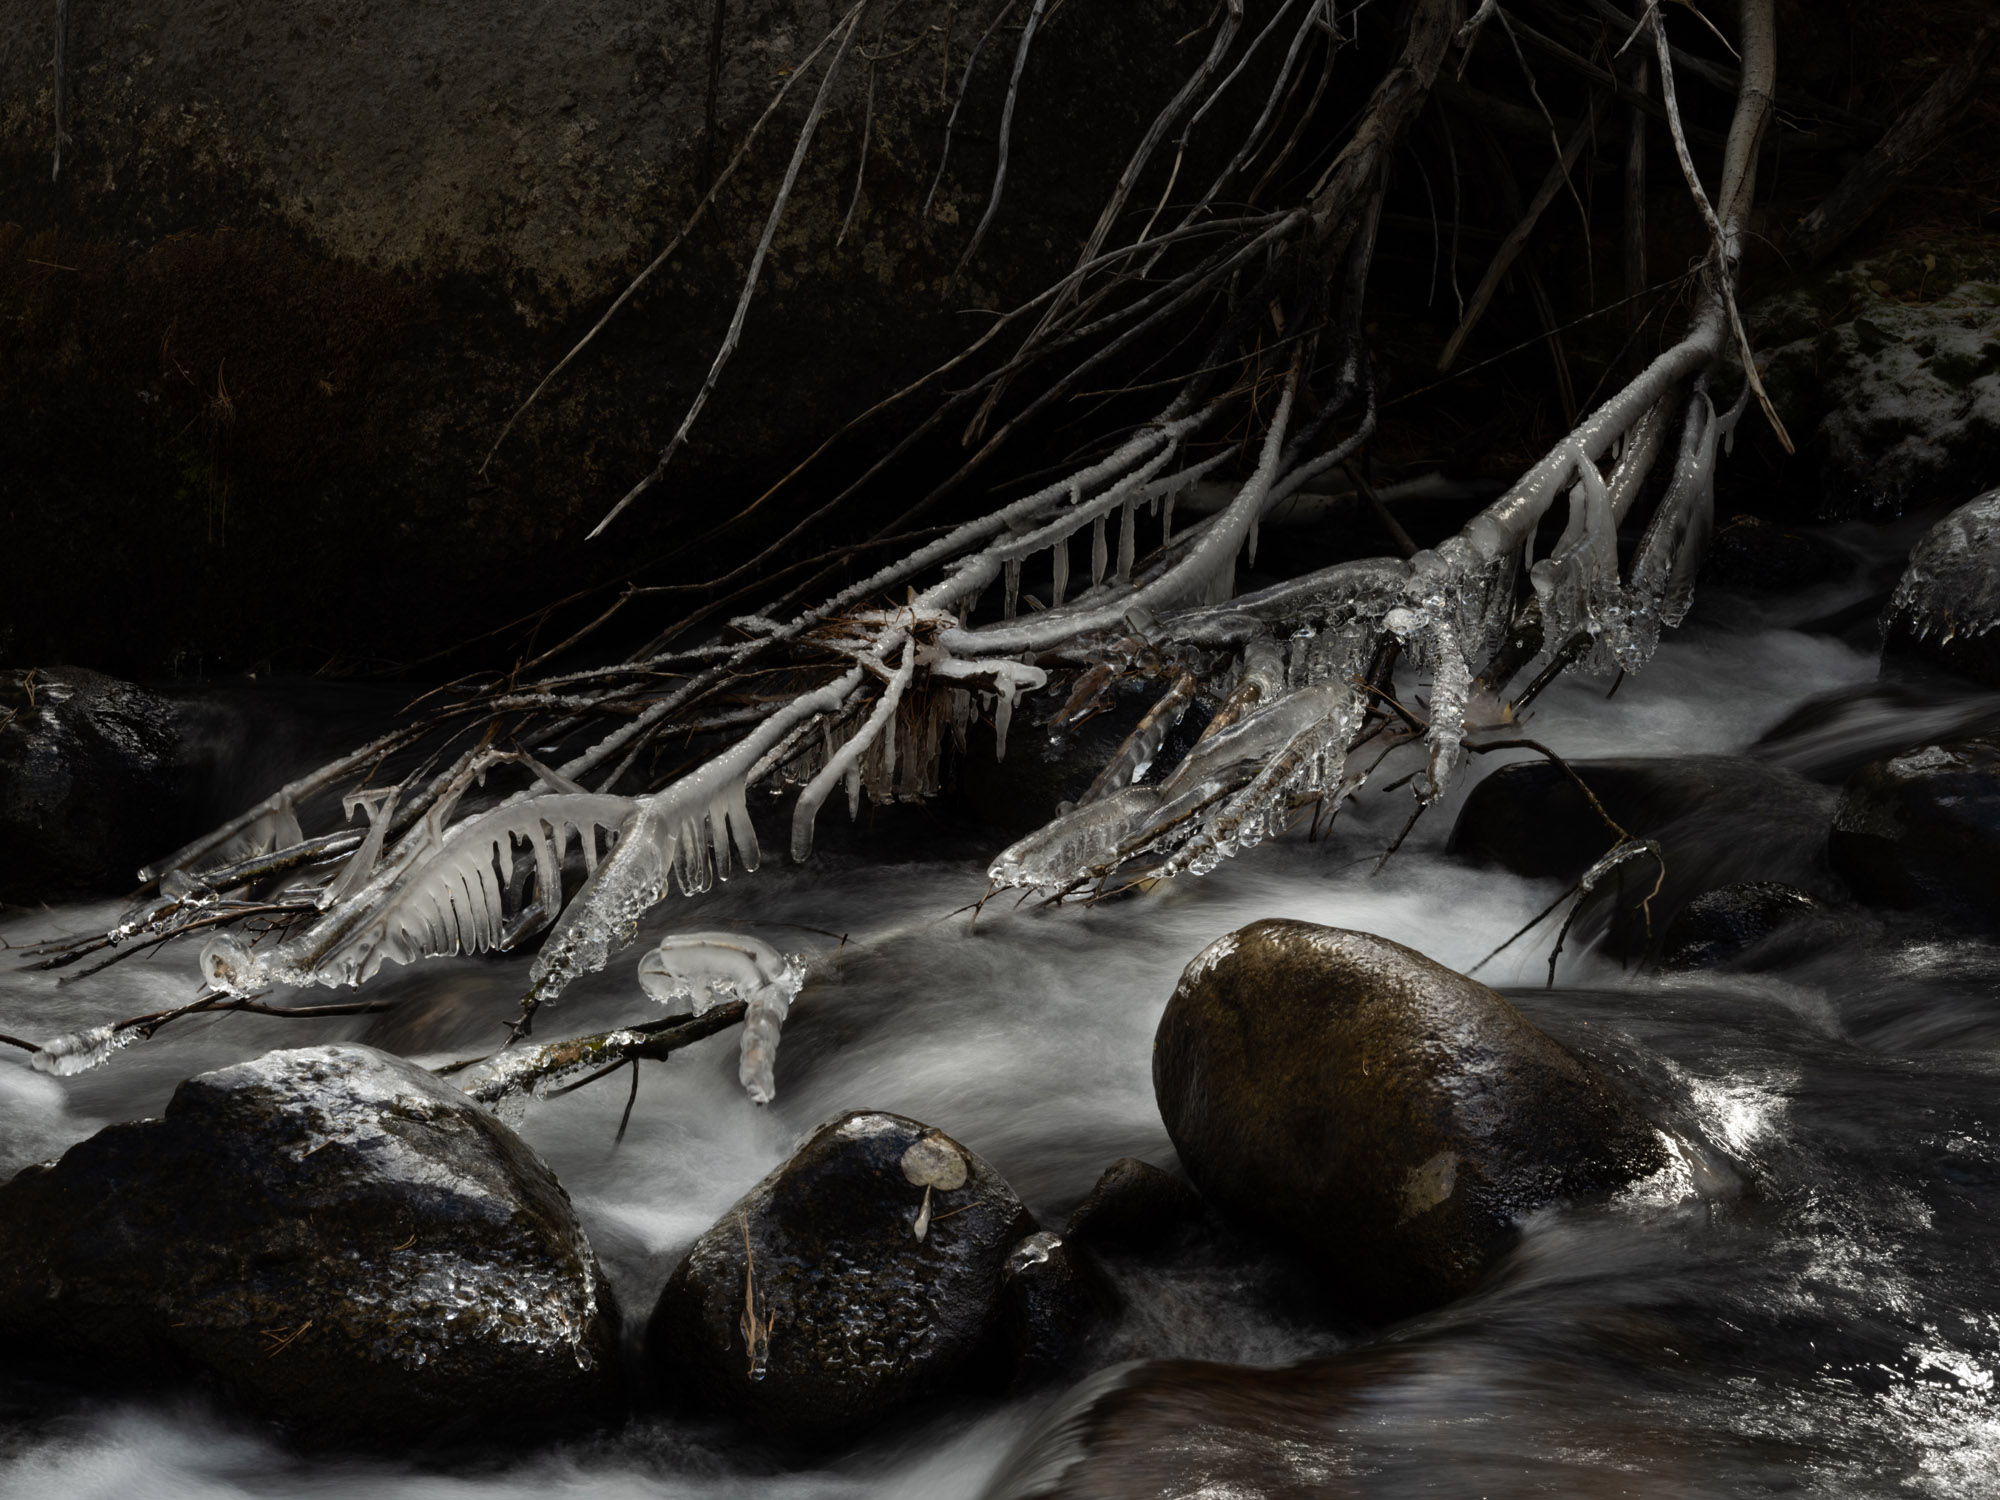 Long exposures of Yosemite's waters reveal wispy trails of water, contrasted with stunning icicles